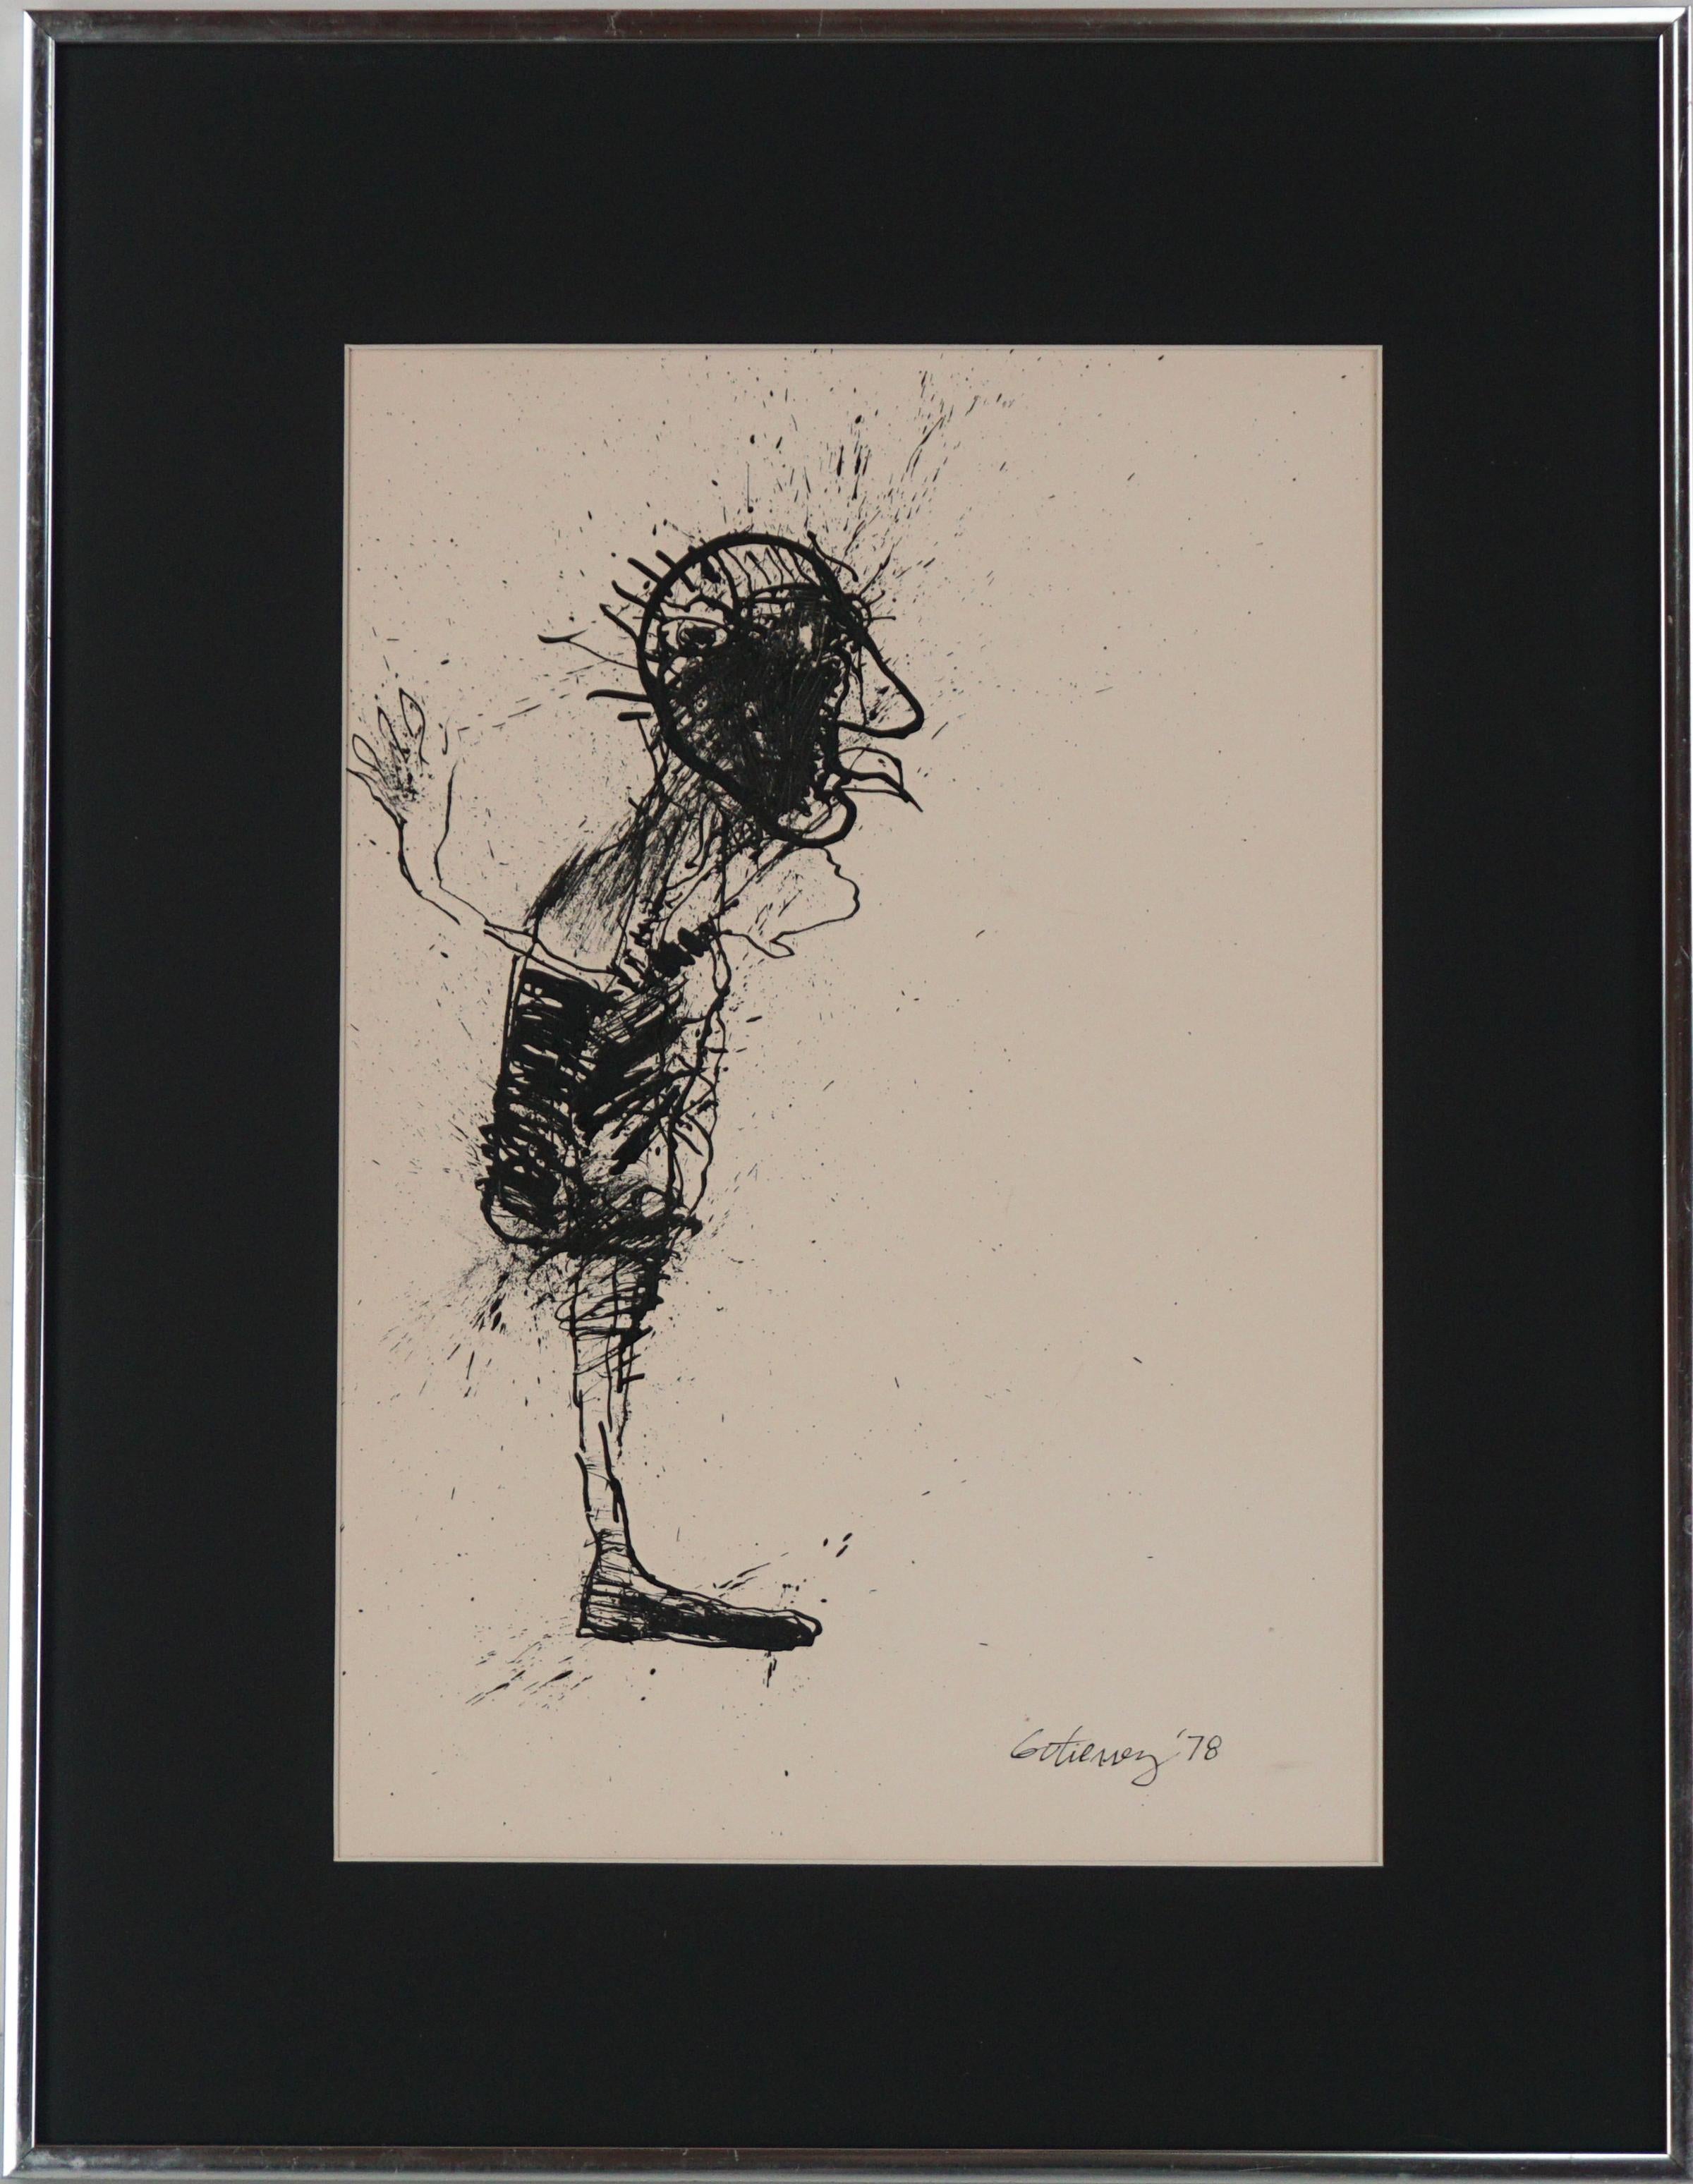 Gutierrez Figurative Art - Vintage Abstracted Expressionist Figurative Ink Drawing -- "How I REALLY Feel"